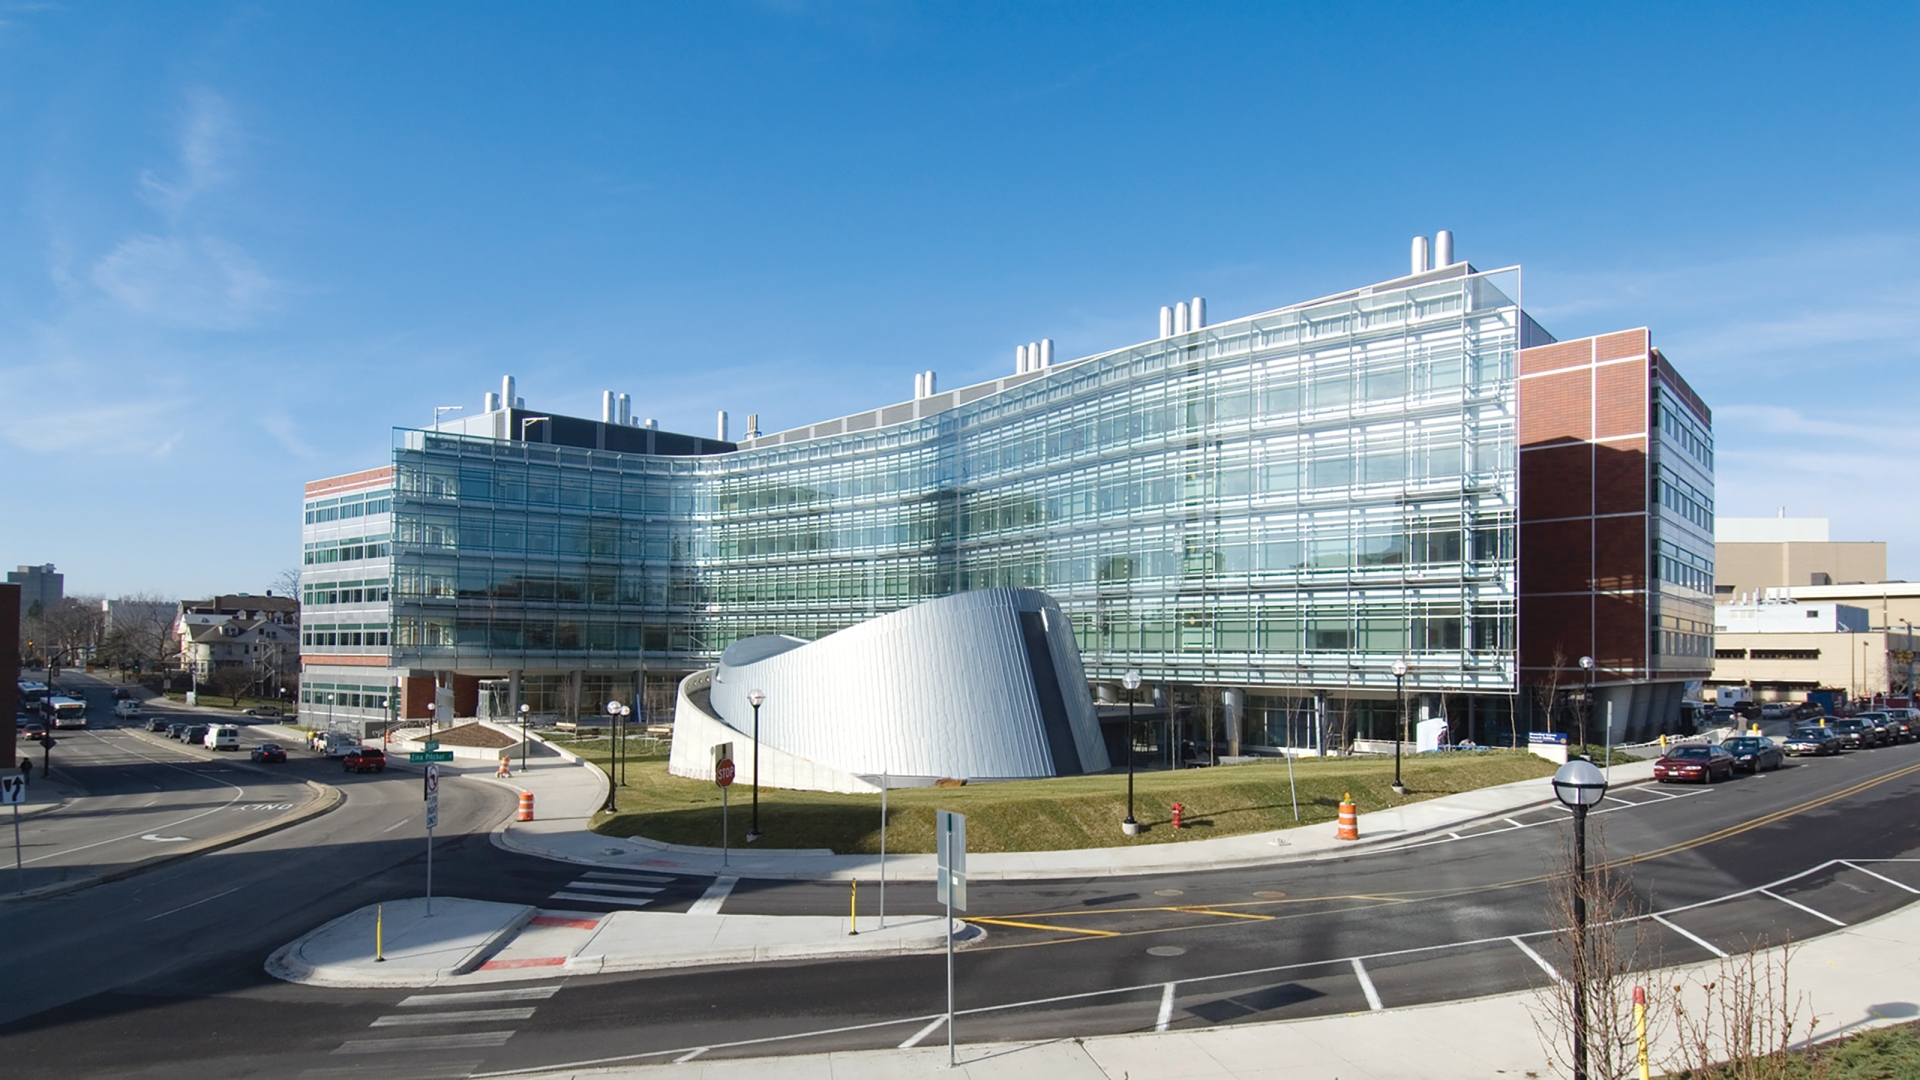 exterior shot of biomedical sciences research building including the auditorium that looks like a pringle